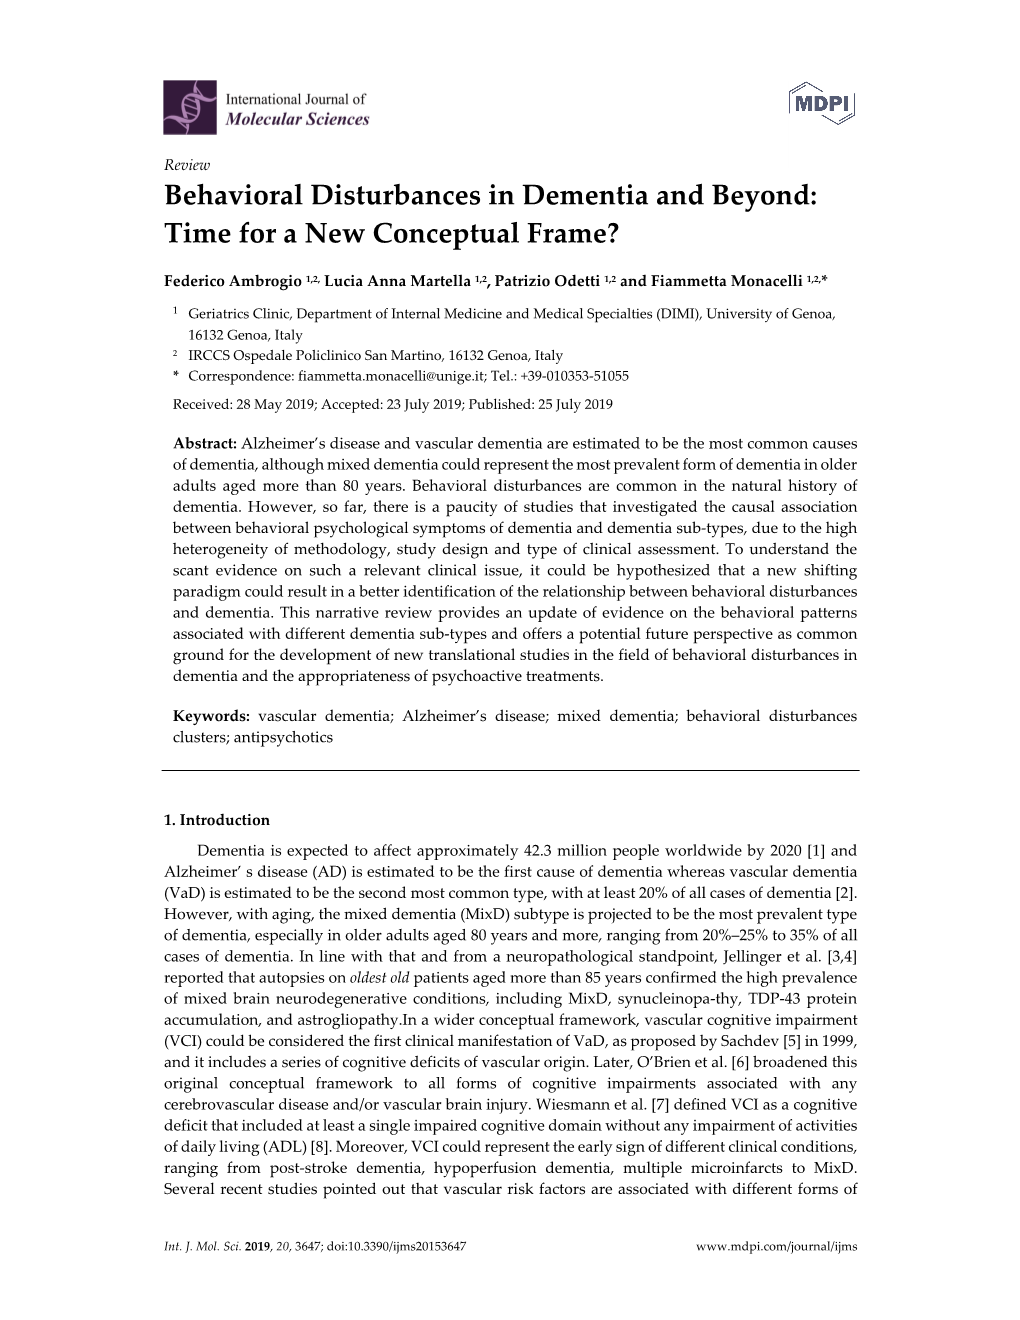 Behavioral Disturbances in Dementia and Beyond: Time for a New Conceptual Frame?